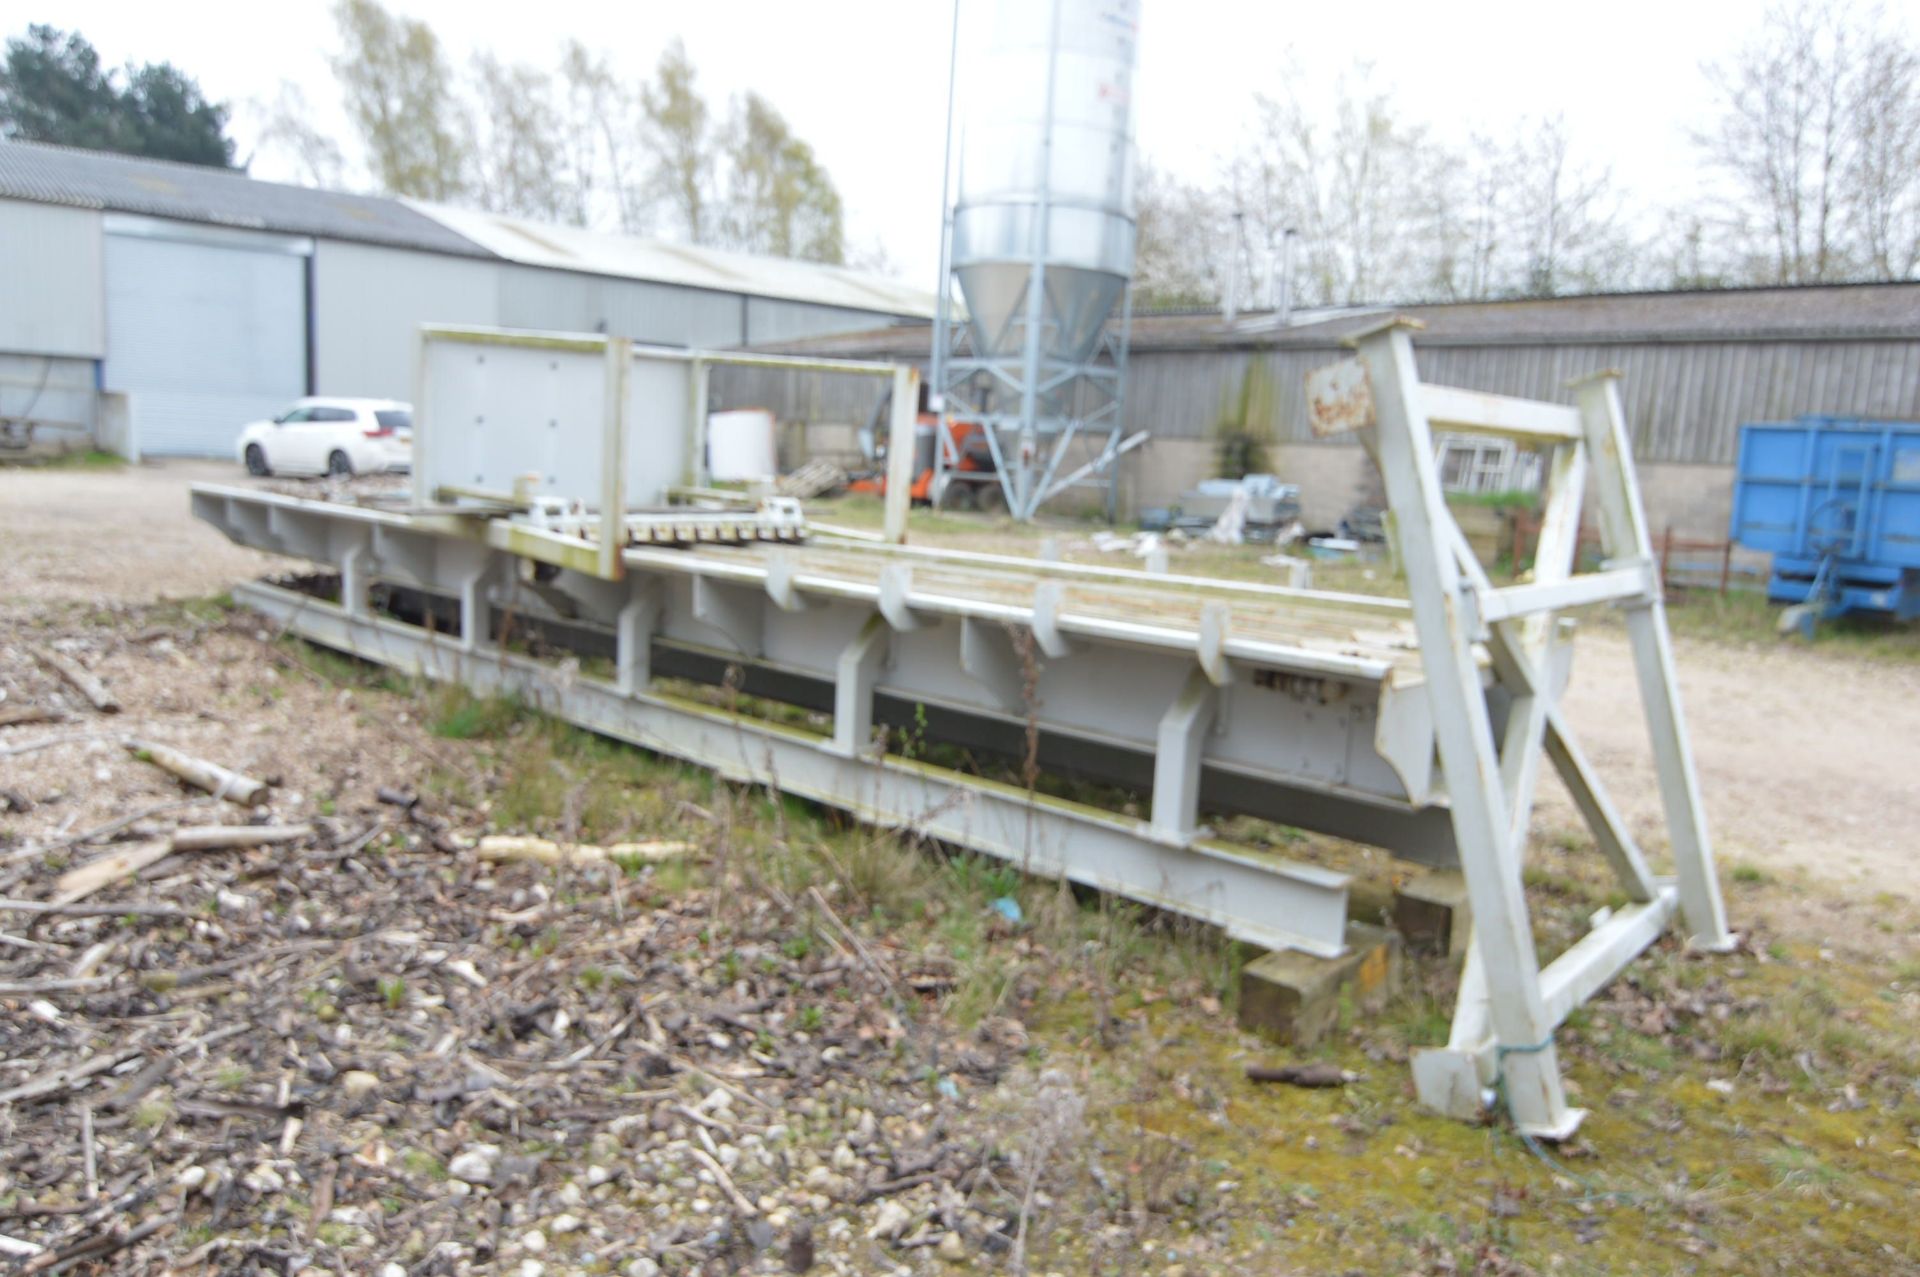 Passat STRAW BALE SHREDDER, with hopper, steel frame supports and conveyor feed unit (no chain), - Image 13 of 14